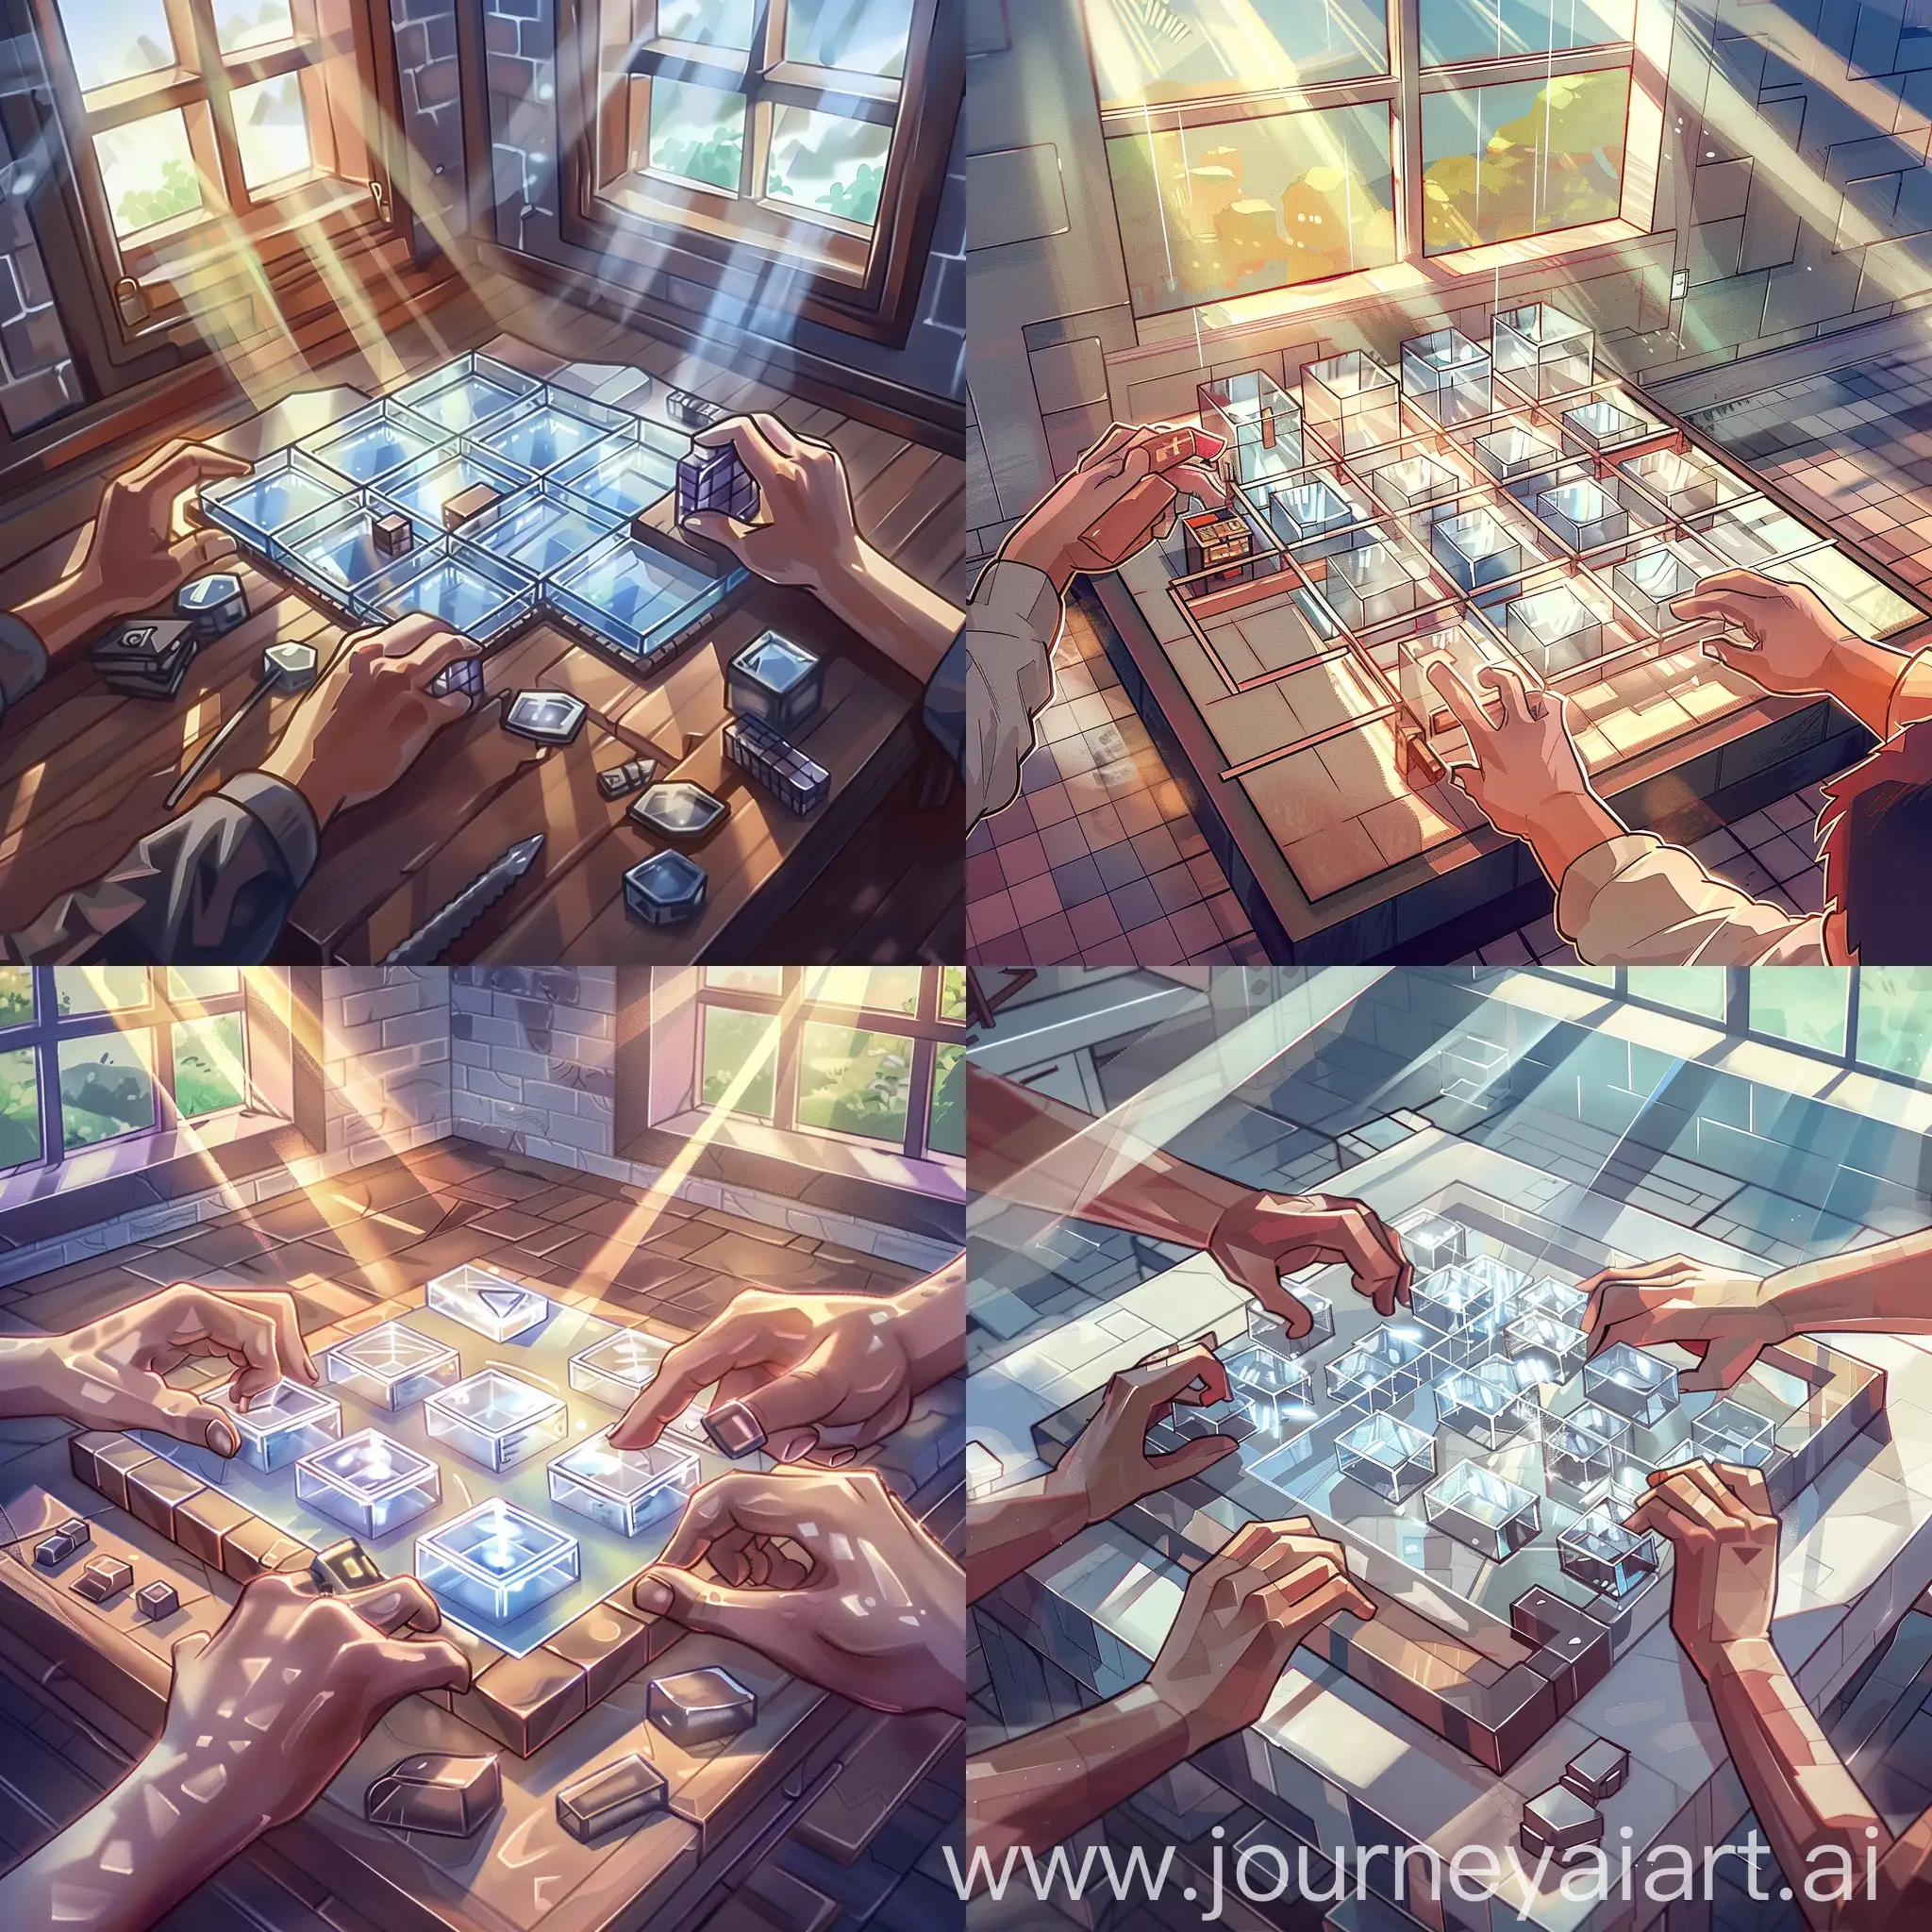 An intricate illustration depicting the crafting process of an invisible frame in a Minecraft setting. A crafting table sits prominently in the foreground, surrounded by pixelated tools and materials. The hands of a character deftly arrange six glass blocks and one block of redstone atop the crafting table, following precise steps. Rays of light from a nearby window illuminate the scene, casting soft shadows across the workspace. The transparent nature of the glass blocks contrasts against the solid texture of the redstone block, emphasizing the unique crafting combination. The character's expression is focused and determined, showcasing their expertise in the intricate art of Minecraft crafting. 